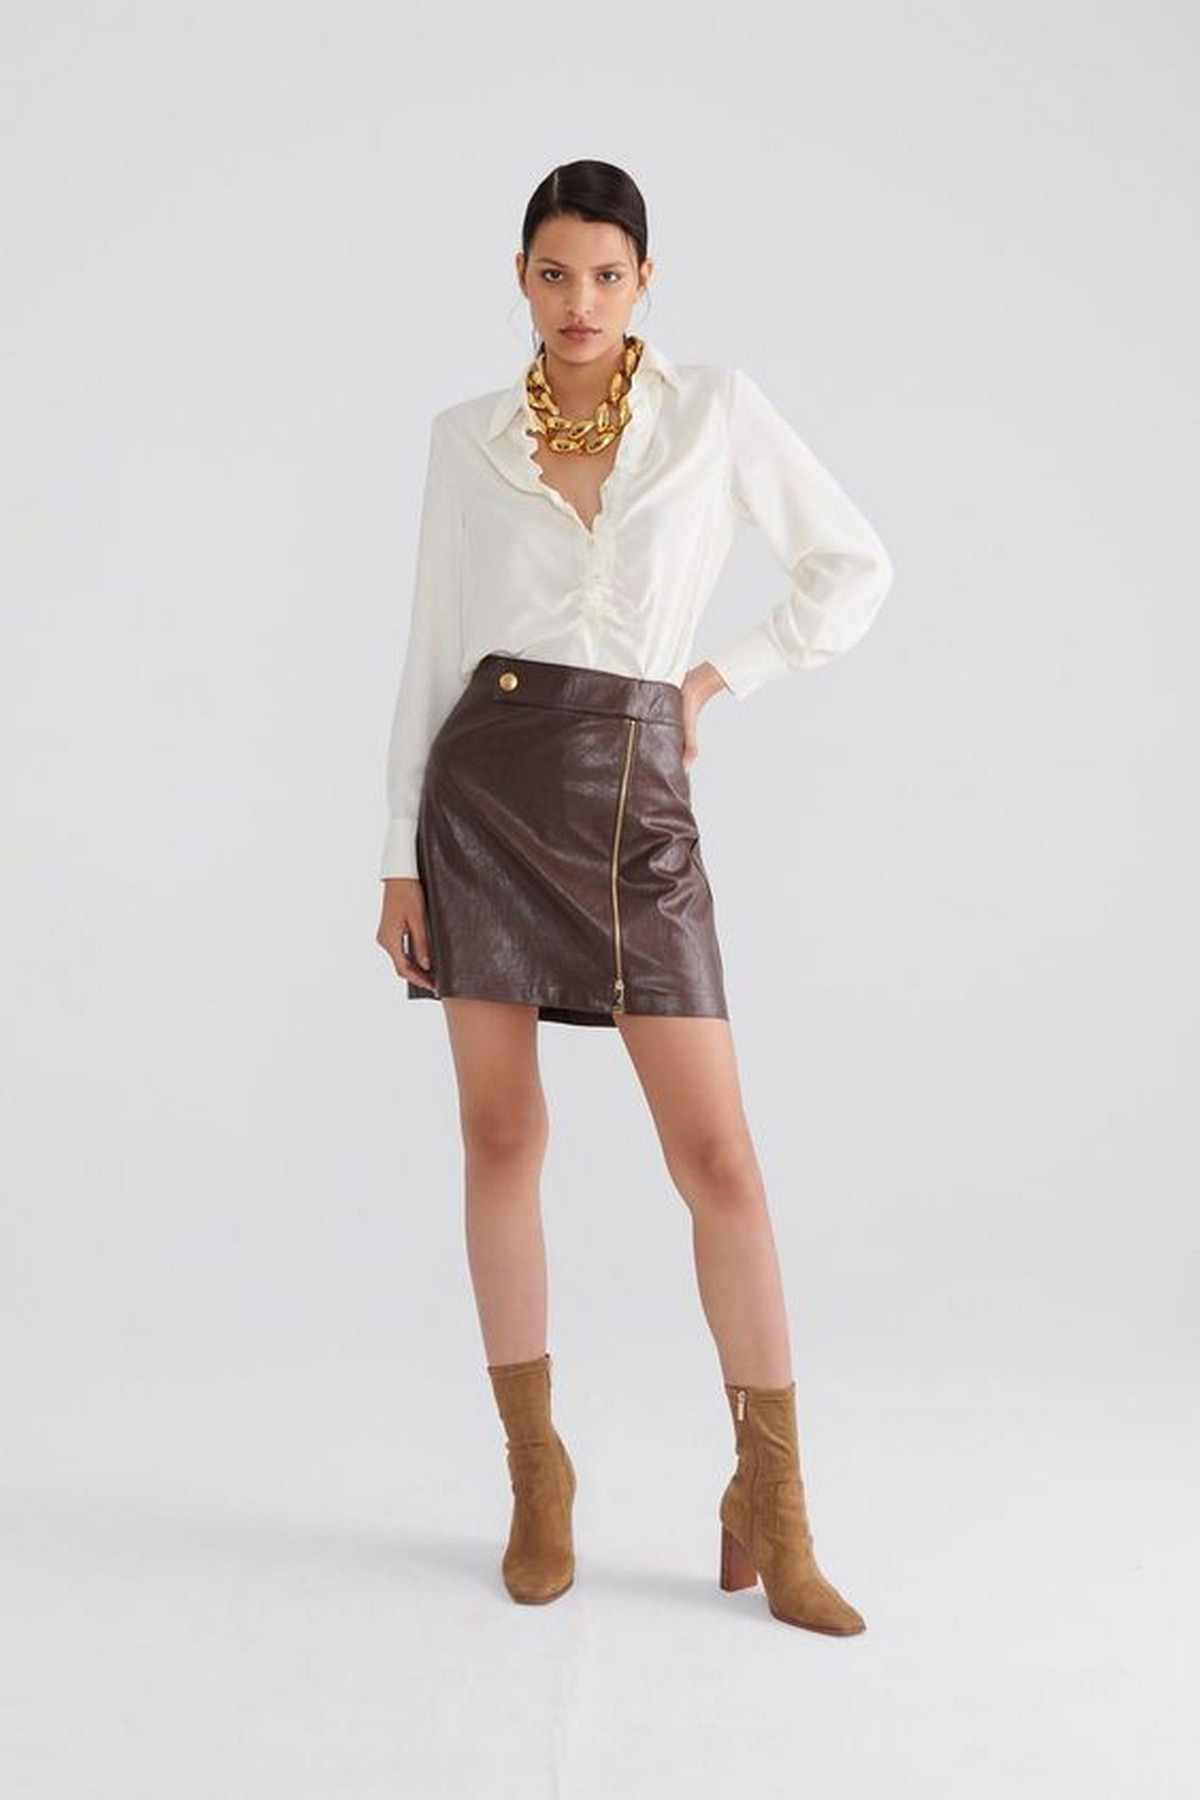 Mixing Leather Skirt And Shirt With Brown Boots